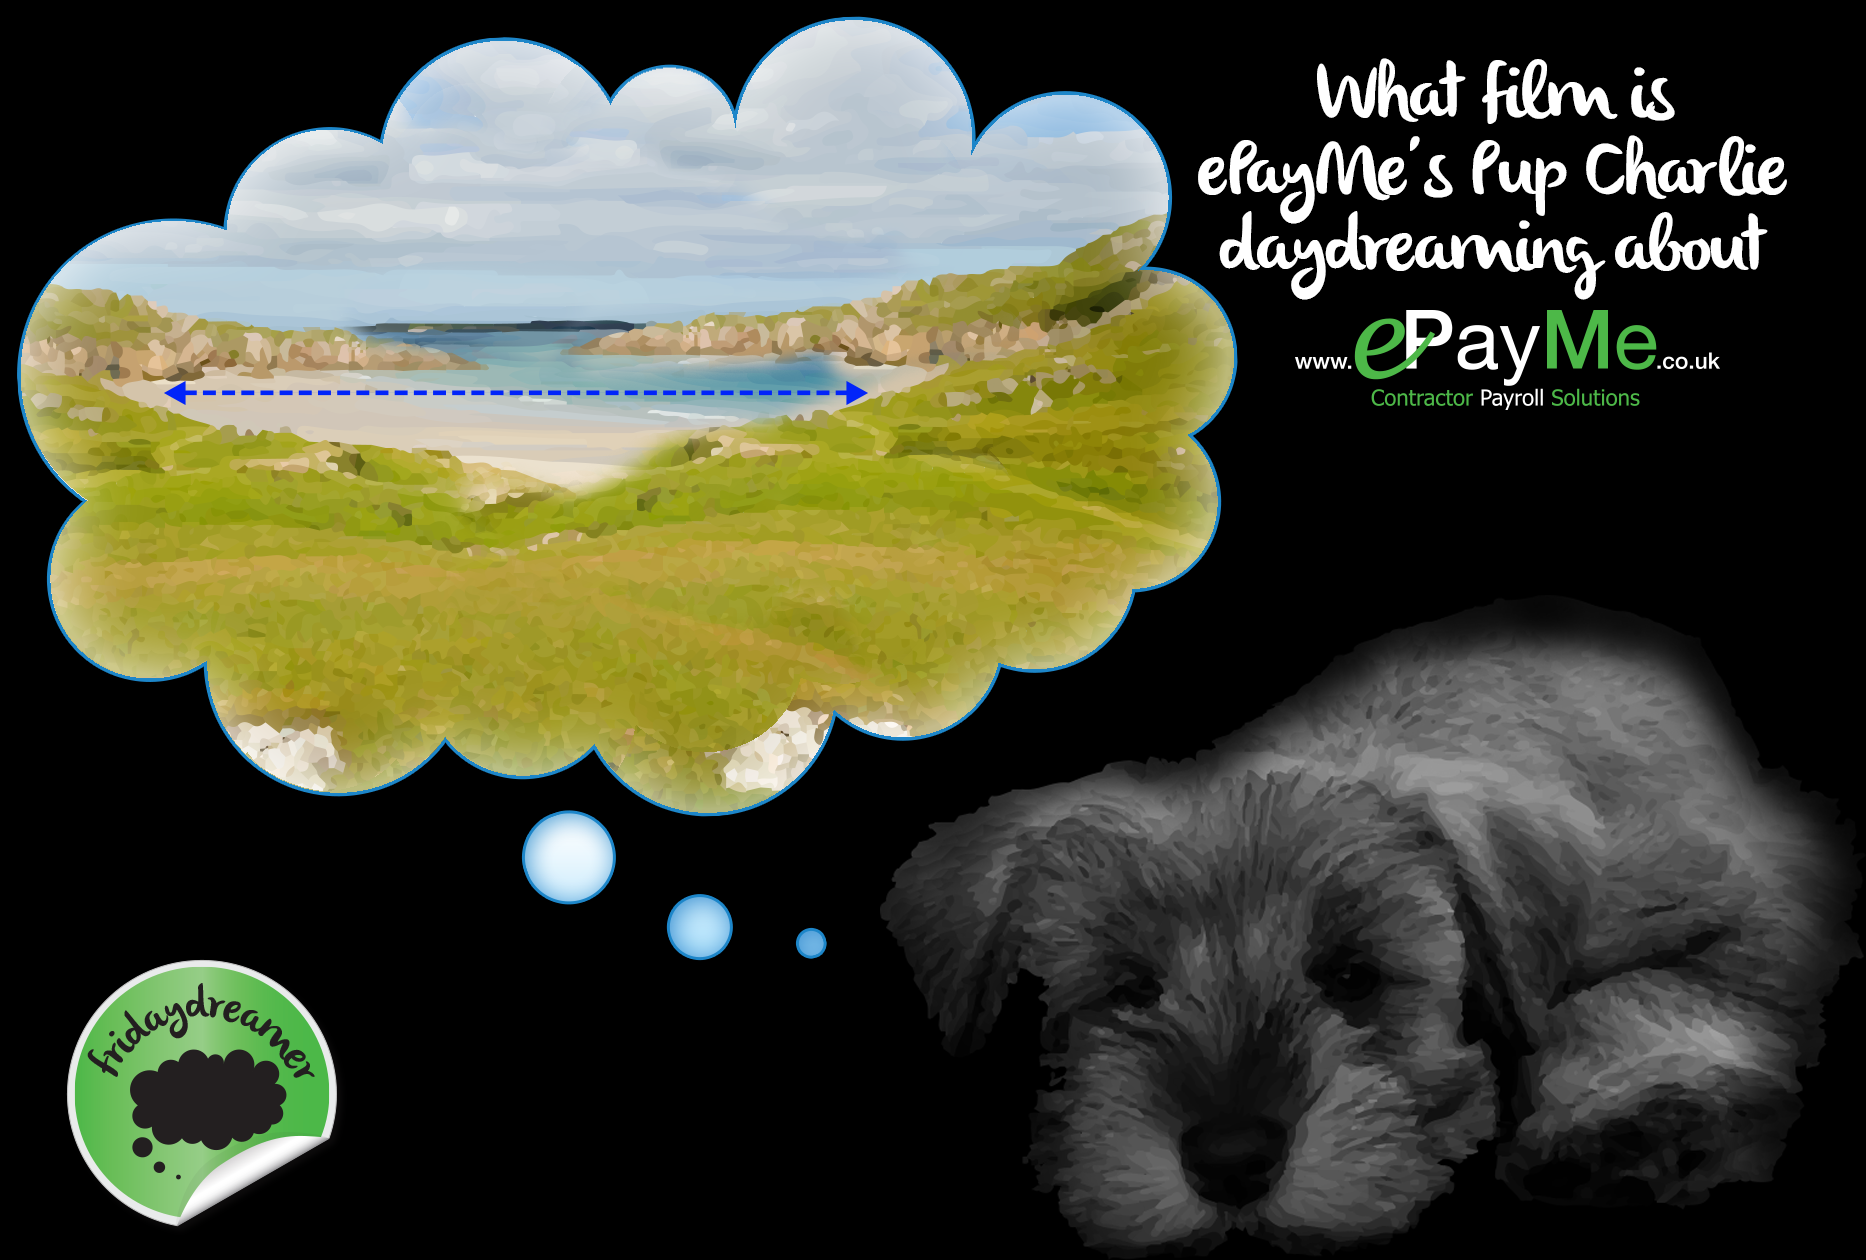 Fridaydreamer - can you guess the film that ePayMe's puppy is daydreaming about